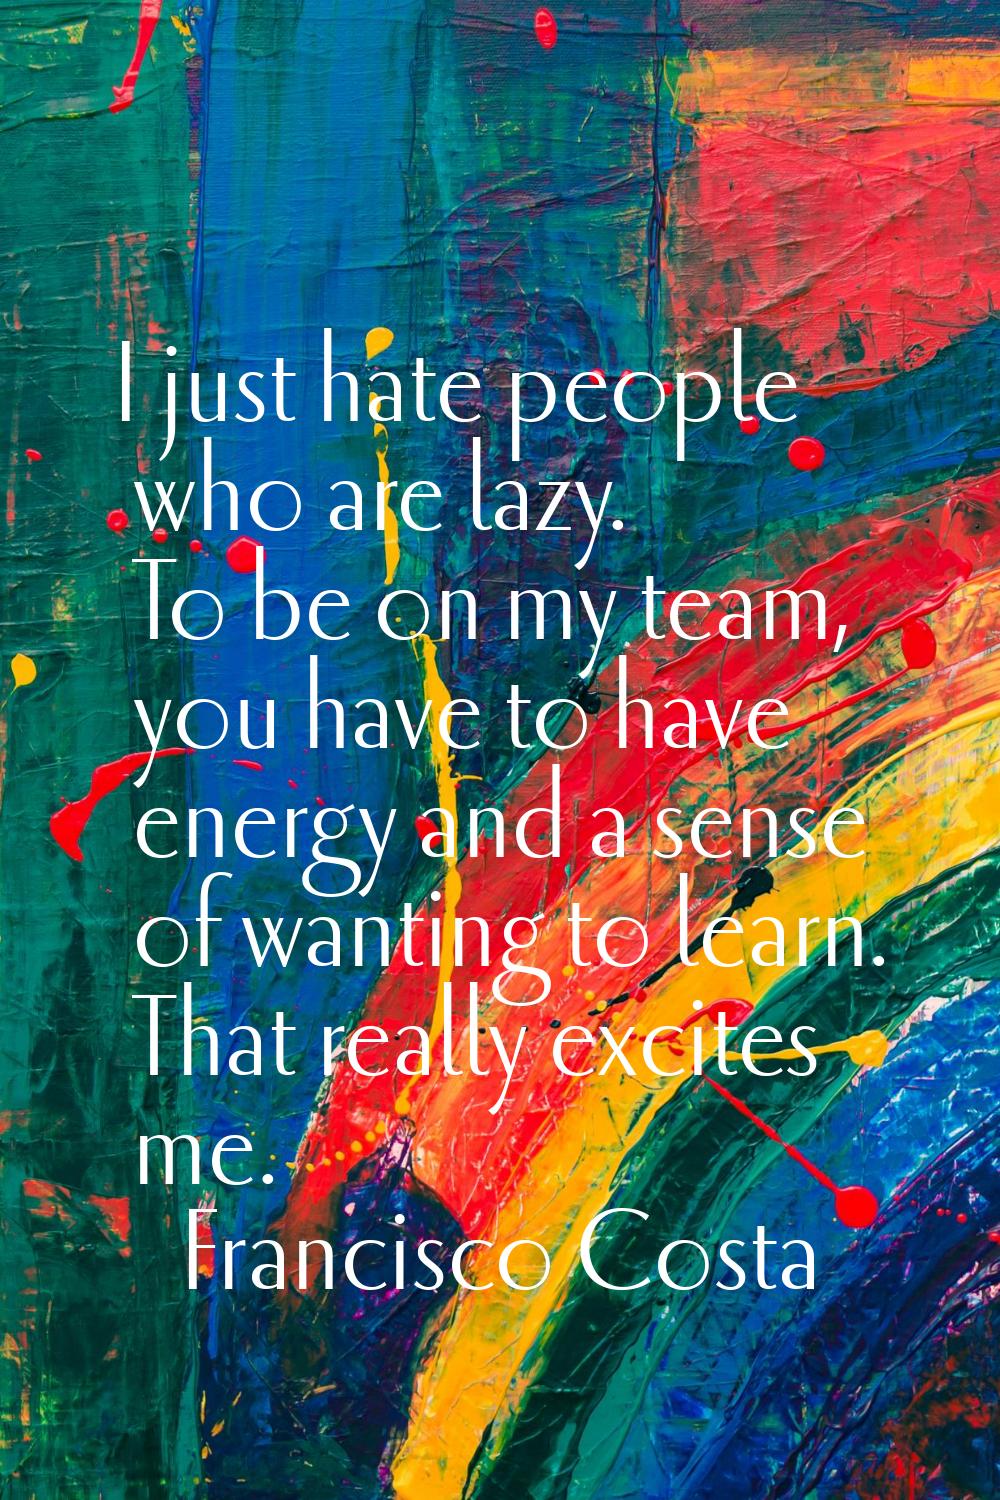 I just hate people who are lazy. To be on my team, you have to have energy and a sense of wanting t